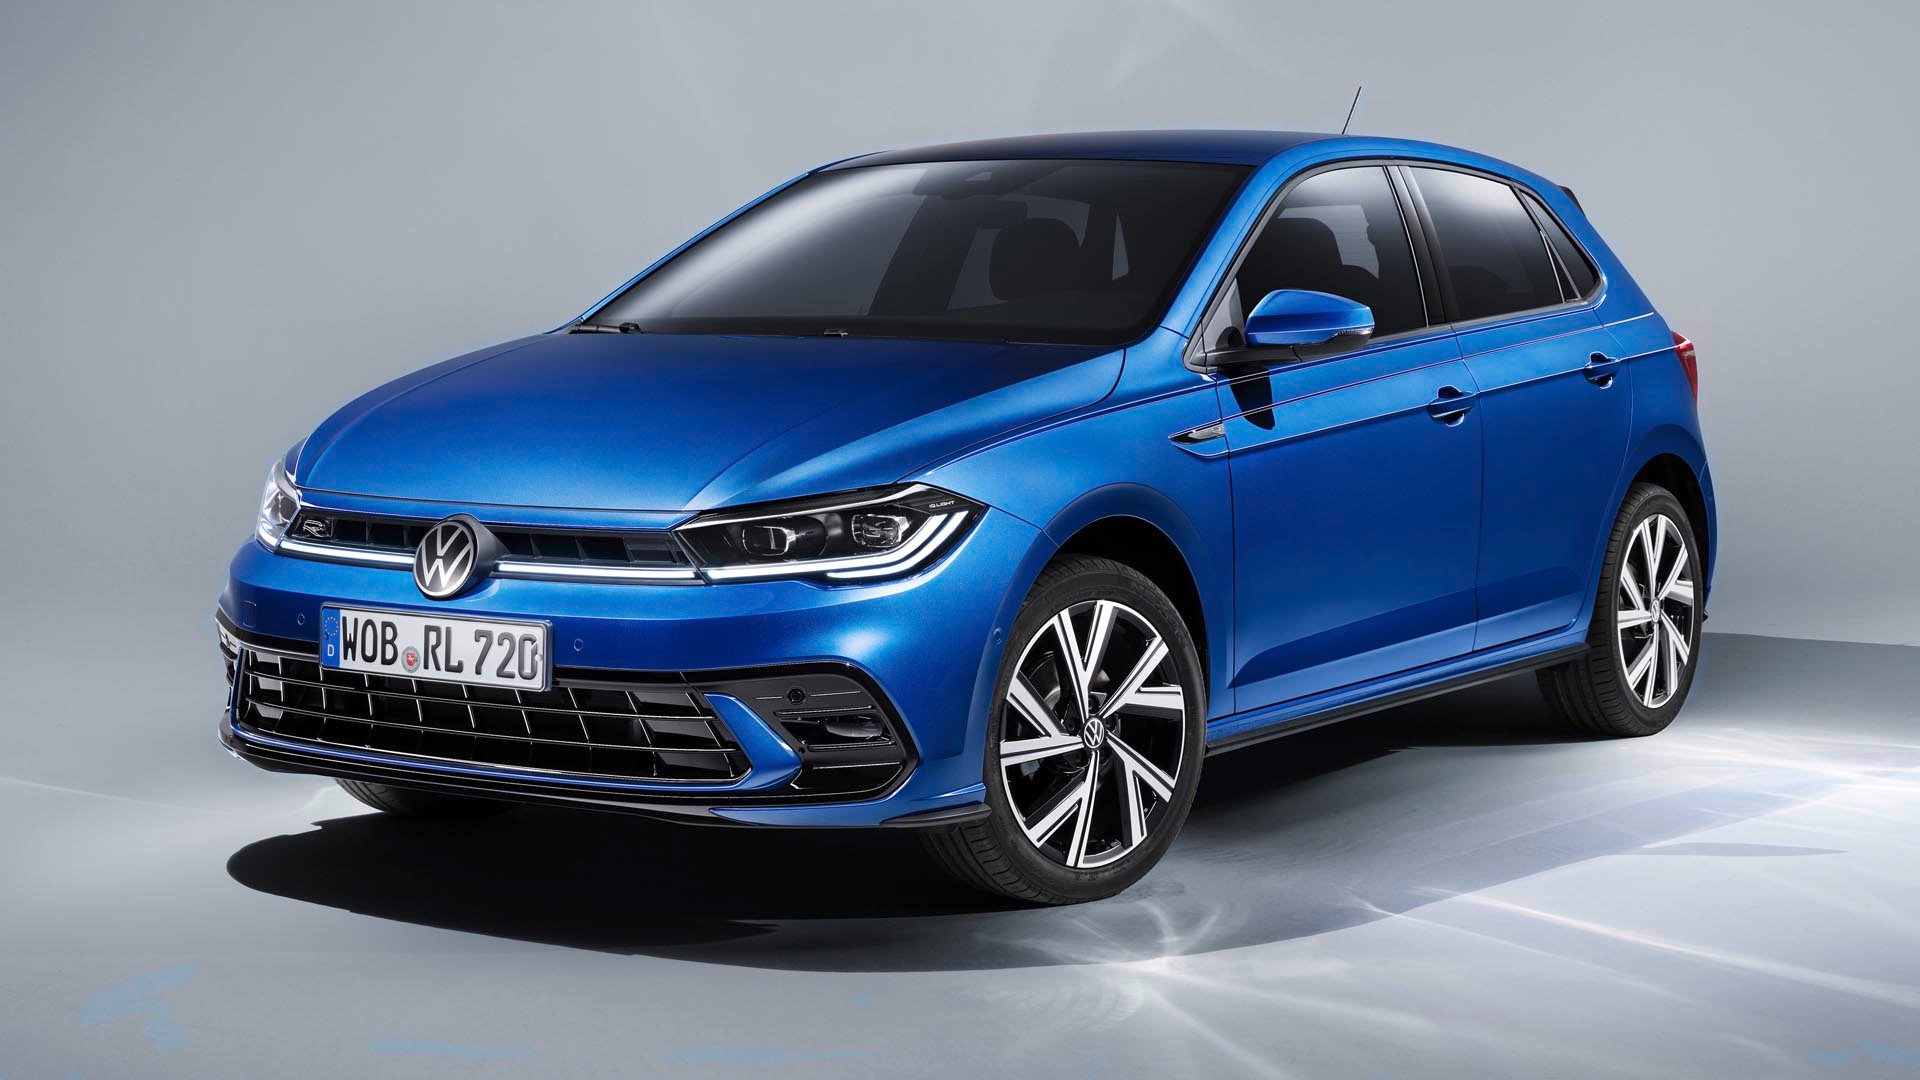 Coming soon: updated VW Polo